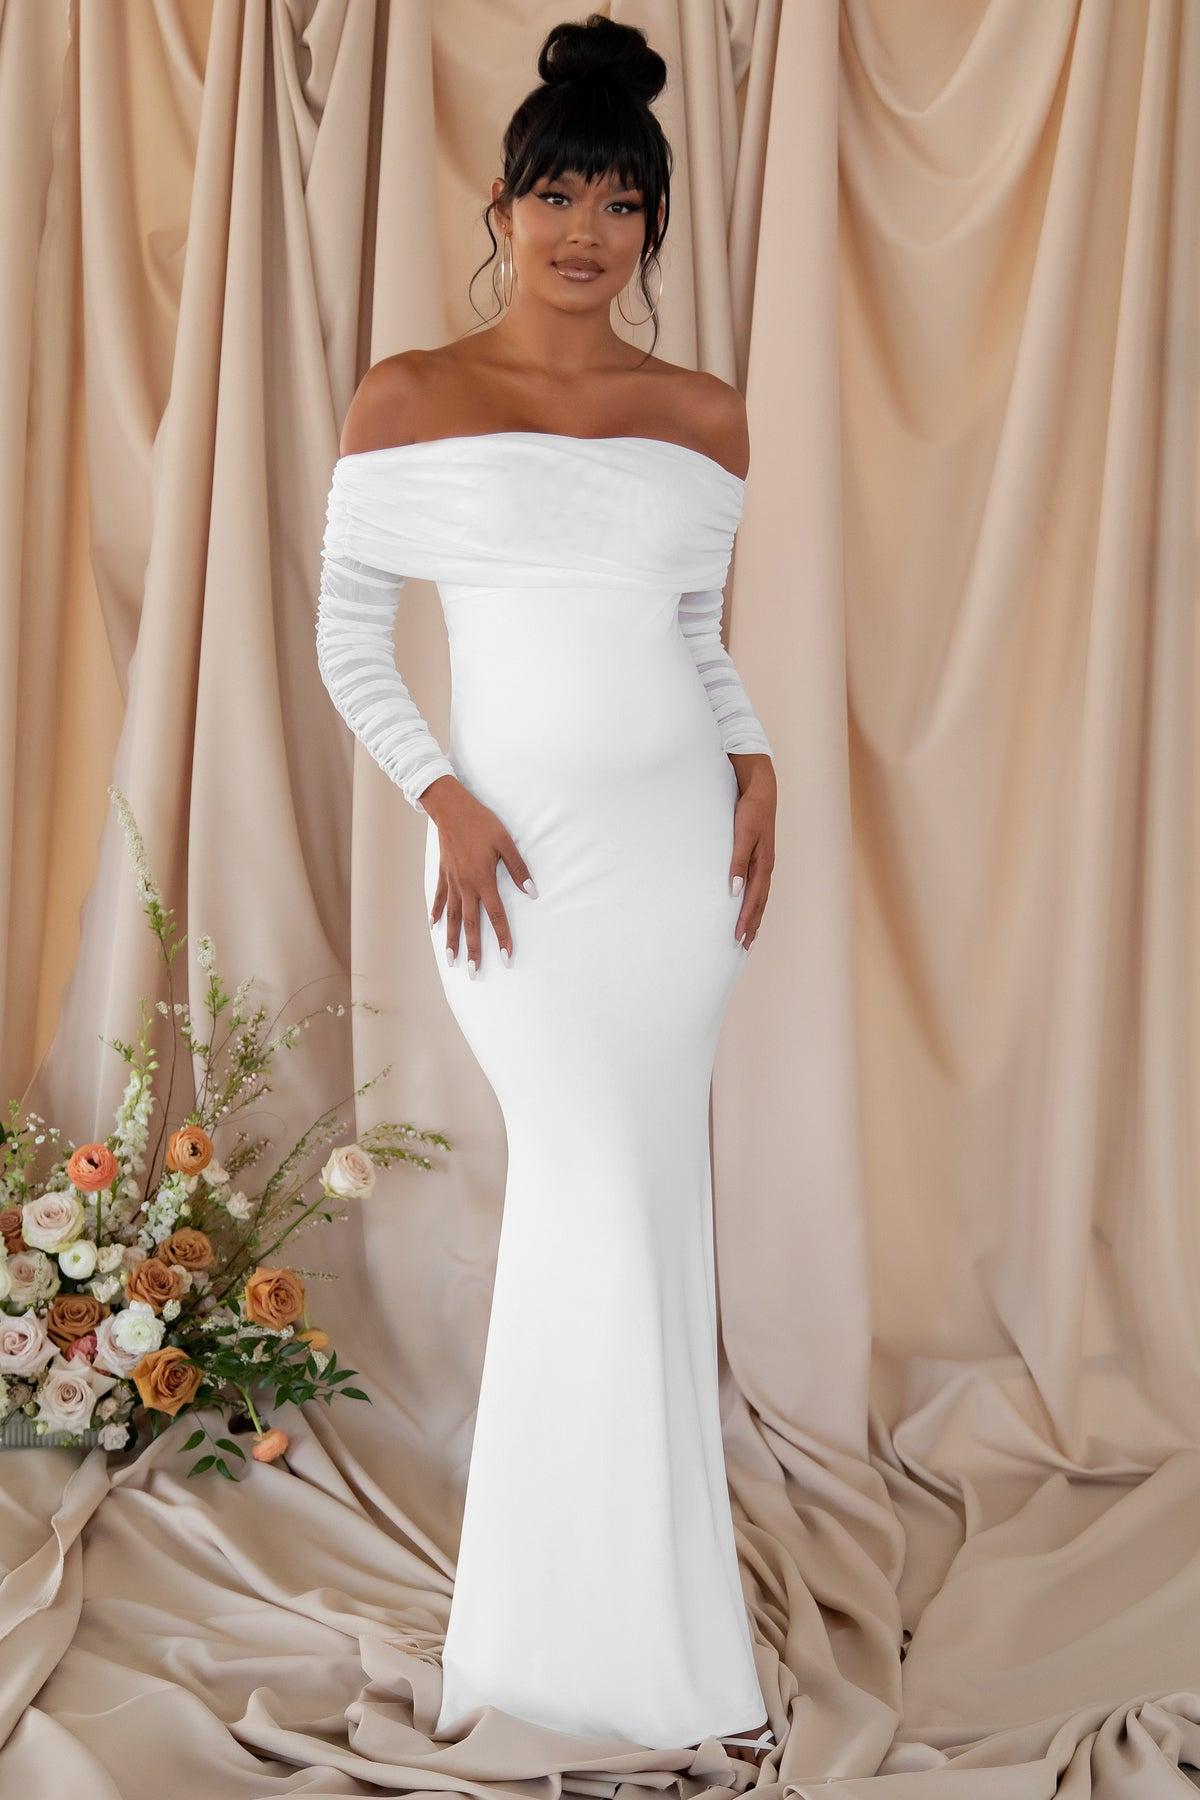 Top 4 Maternity Dress Styles for A Wedding